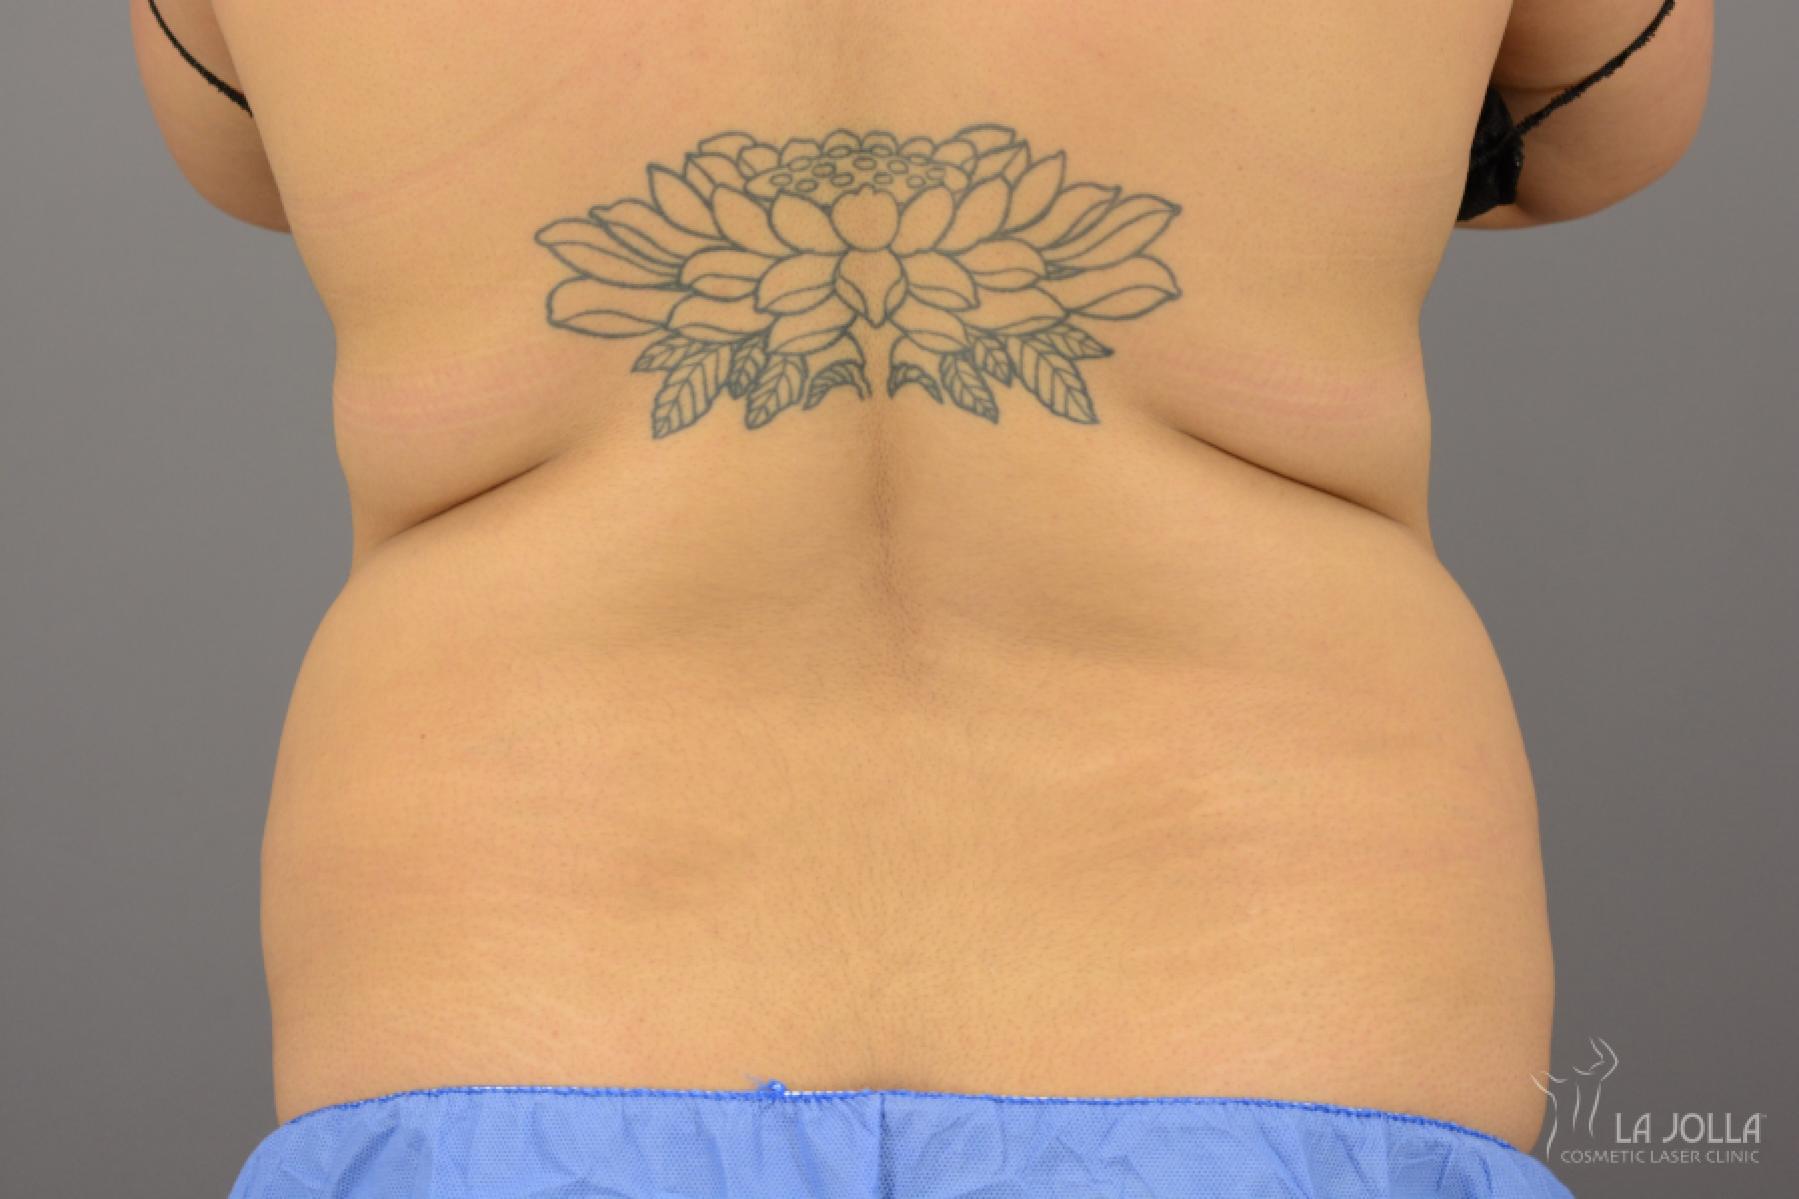 CoolSculpting®: Patient 15 - Before 1